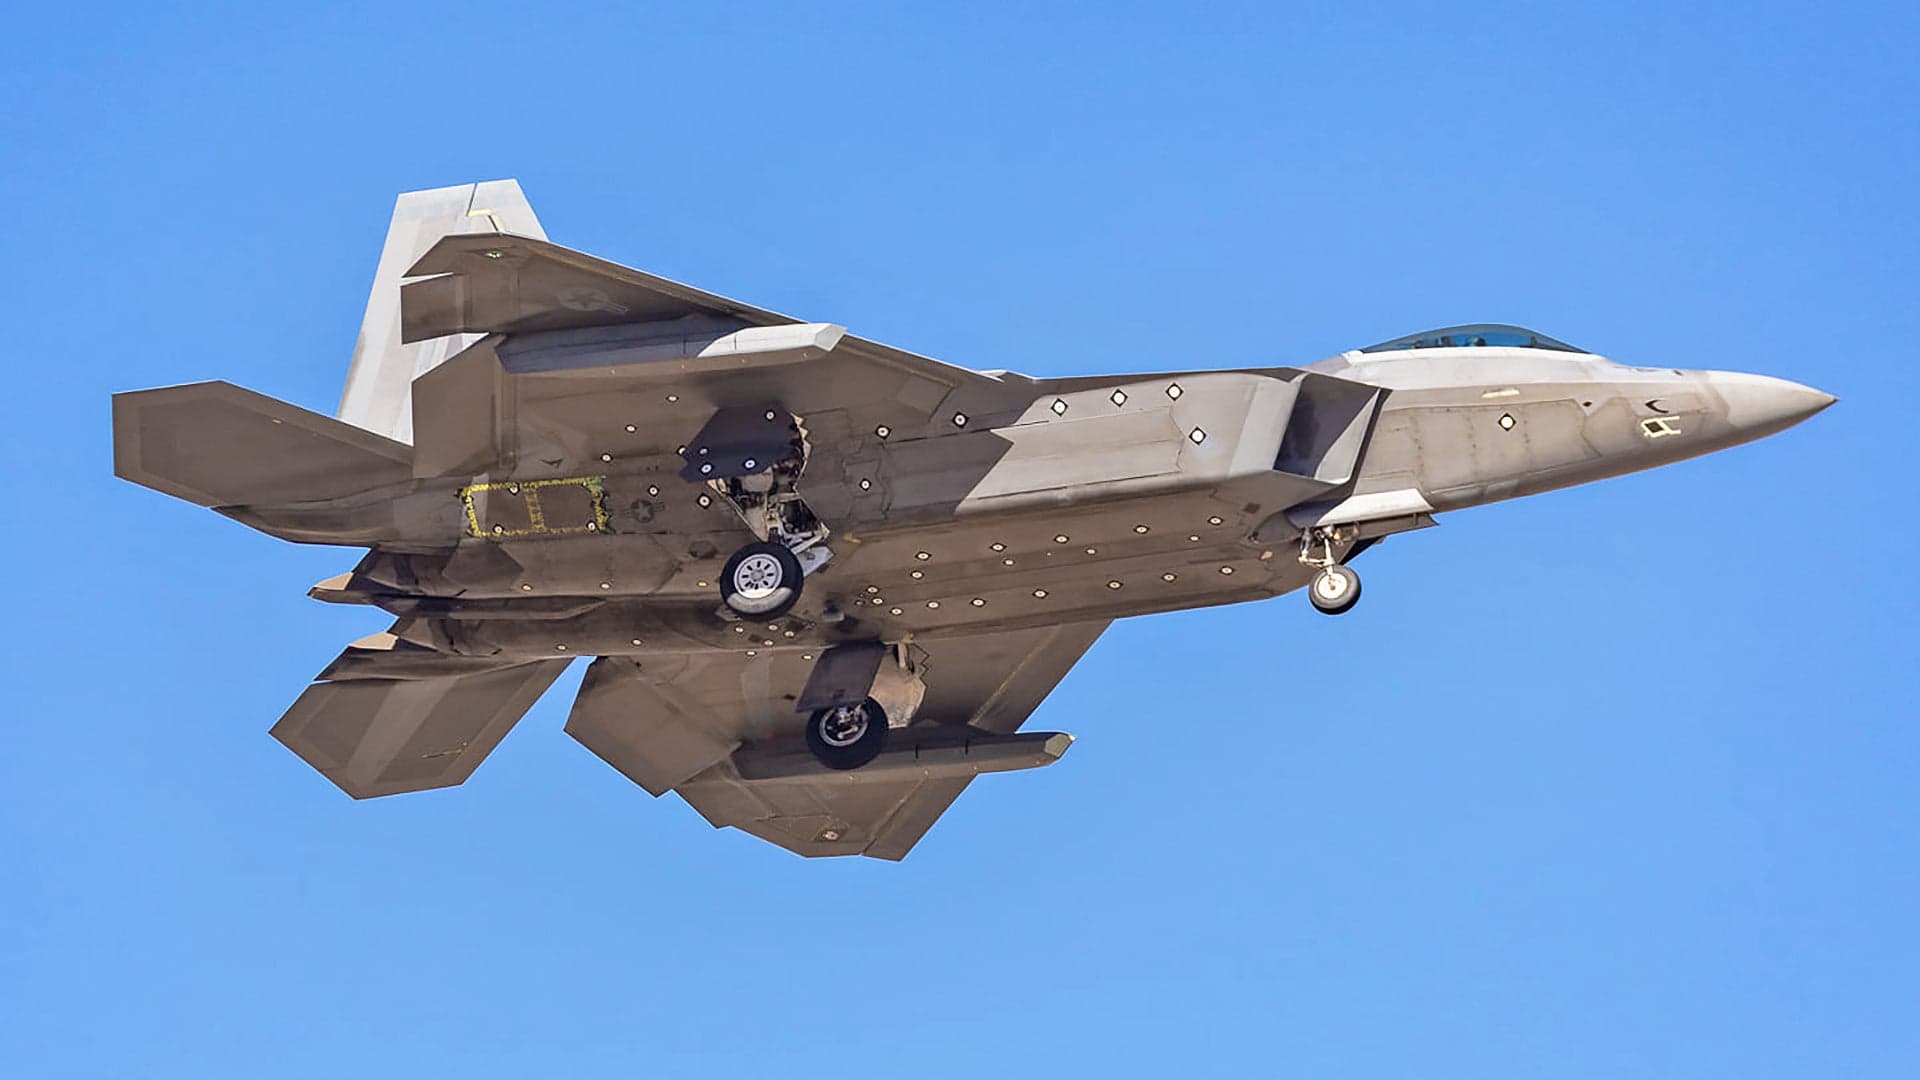 F-22 Raptor Spotted Flying With Stealthy Underwing Pods